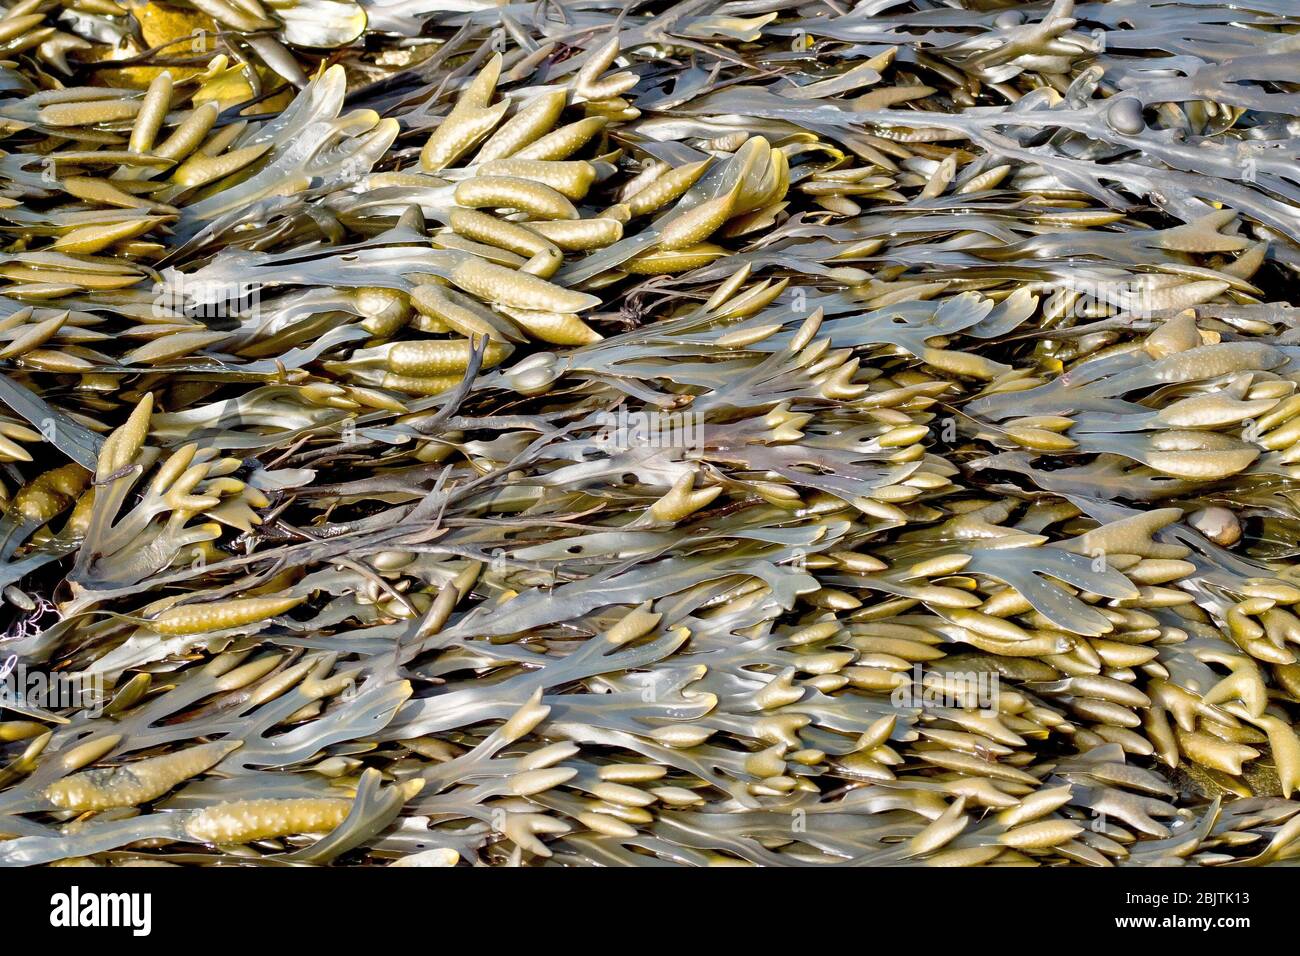 Bladder Wrack (fucus vesiculosis), close up showing the seaweed laying flat on the foreshore. Stock Photo